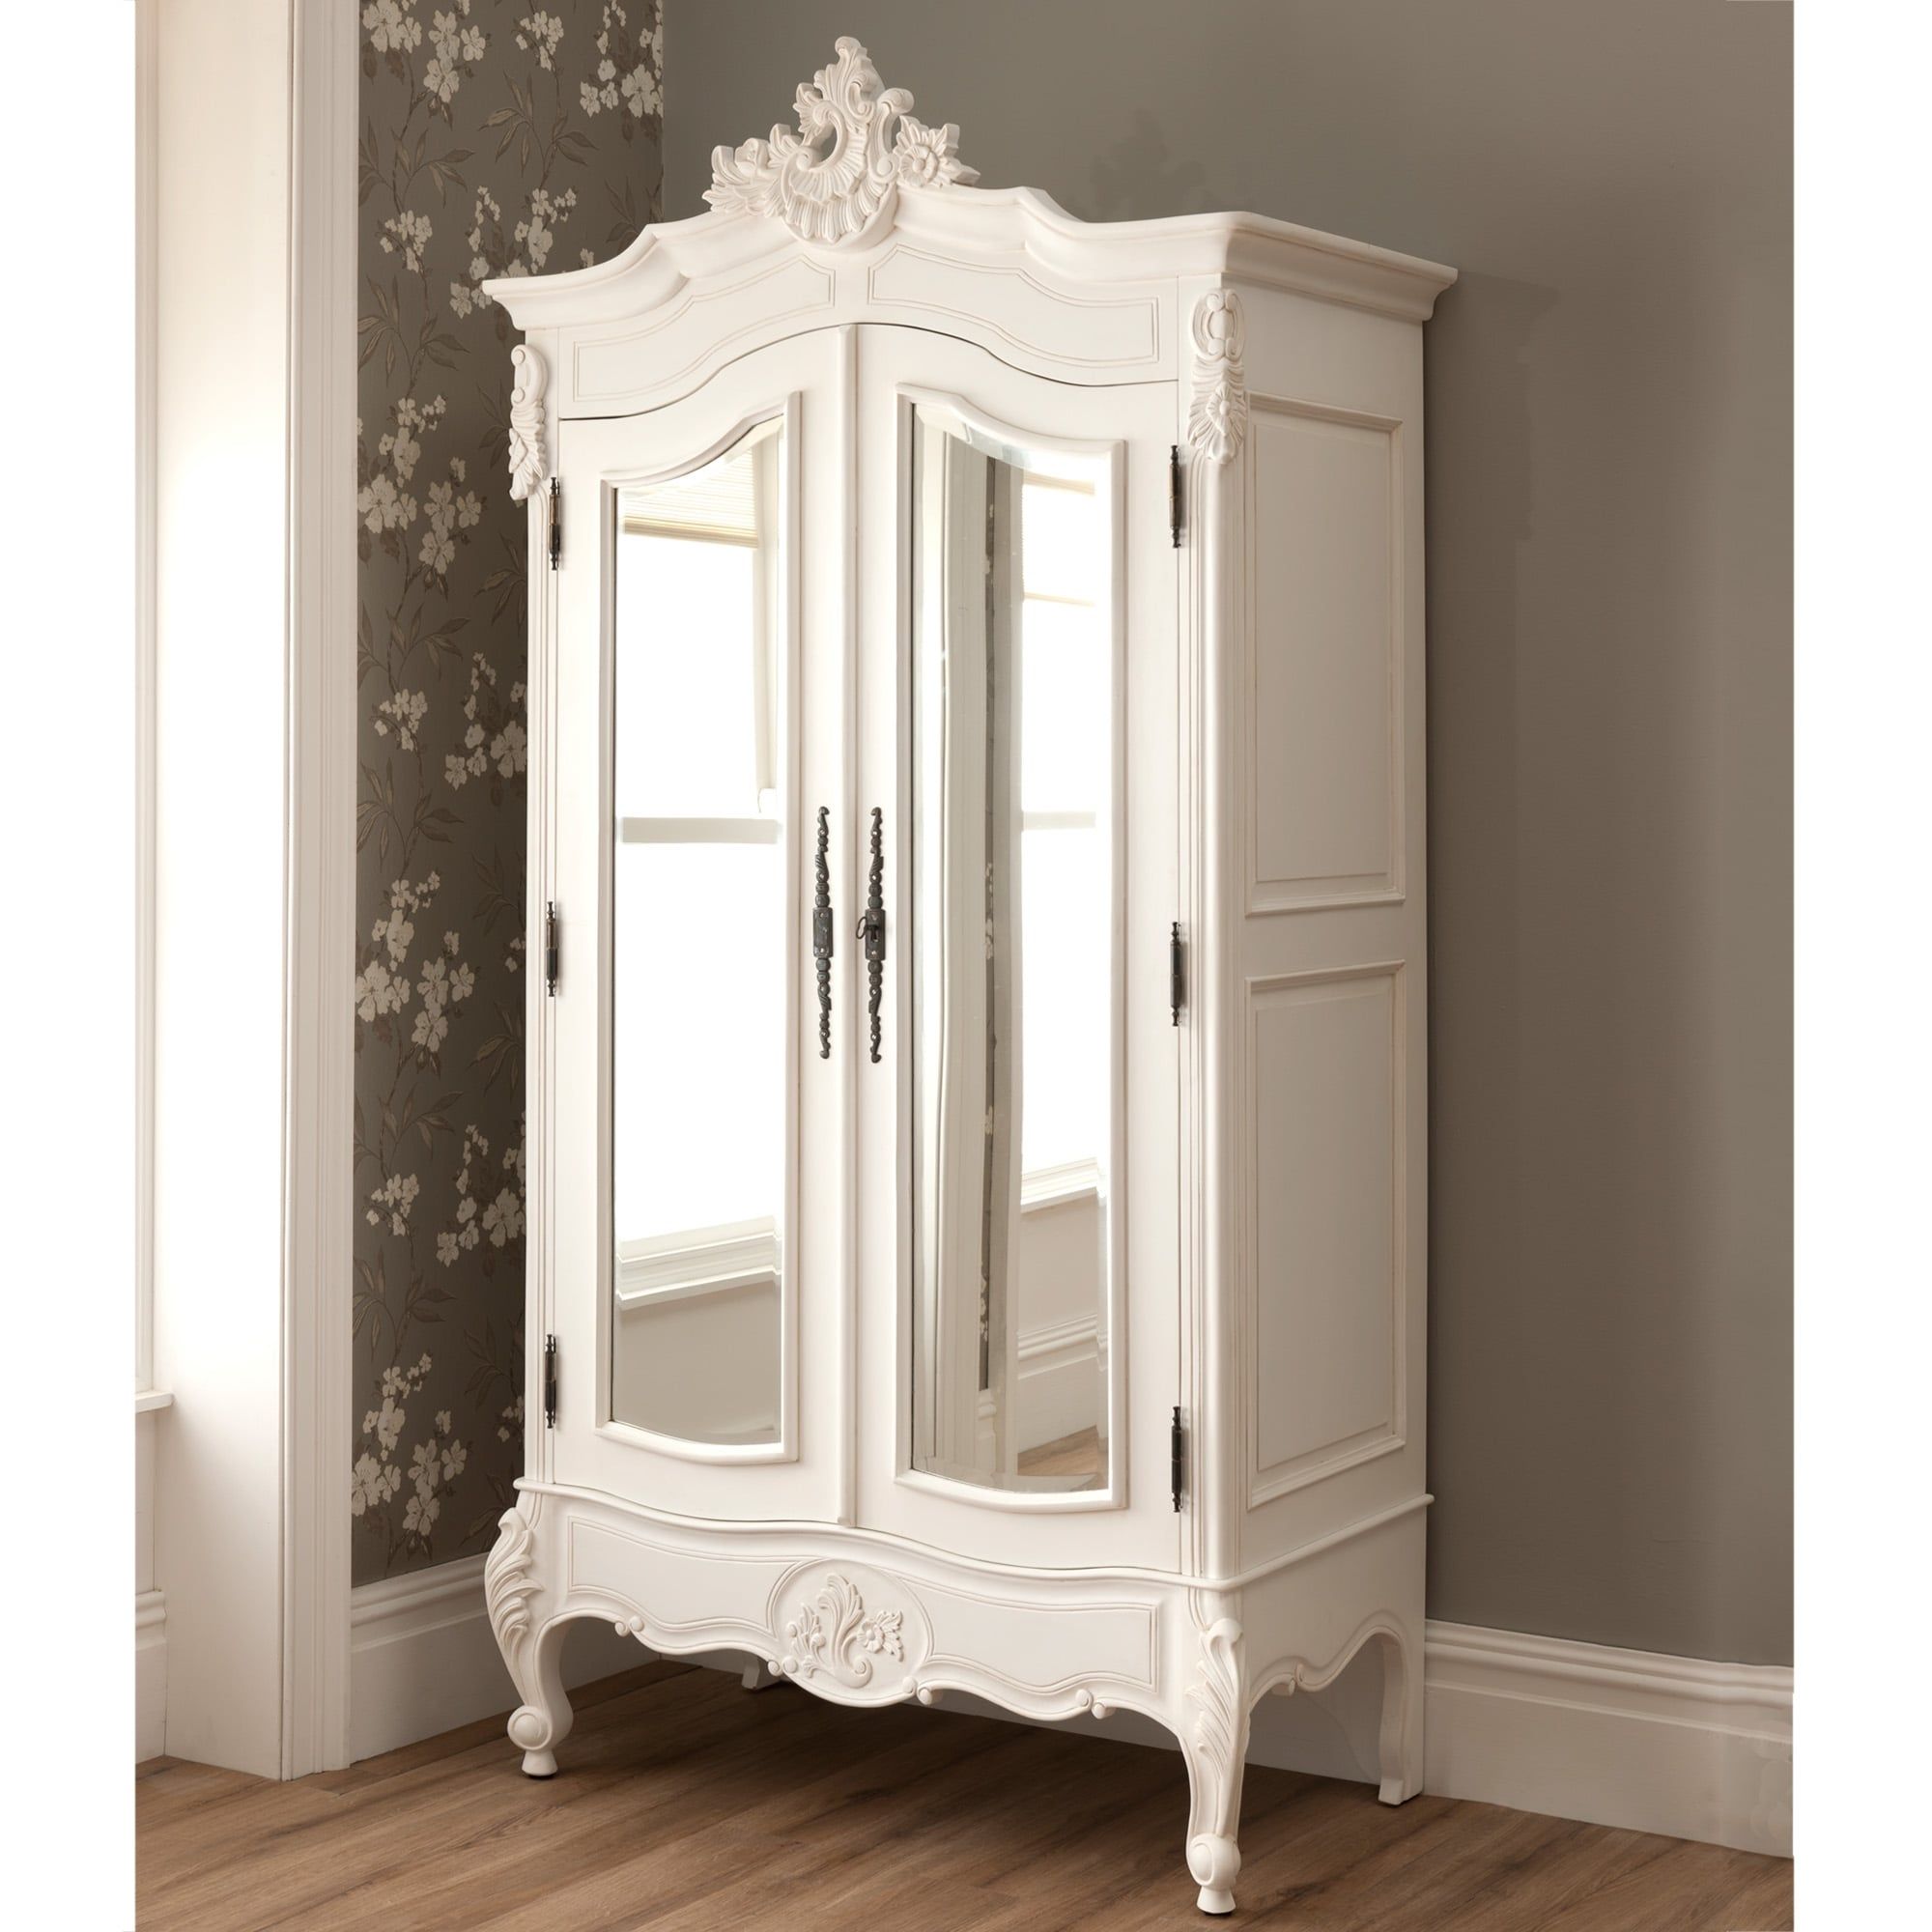 La Rochelle Antique French Mirrored 2 Door Wardrobe Inside French Wardrobes For Sale (View 5 of 15)